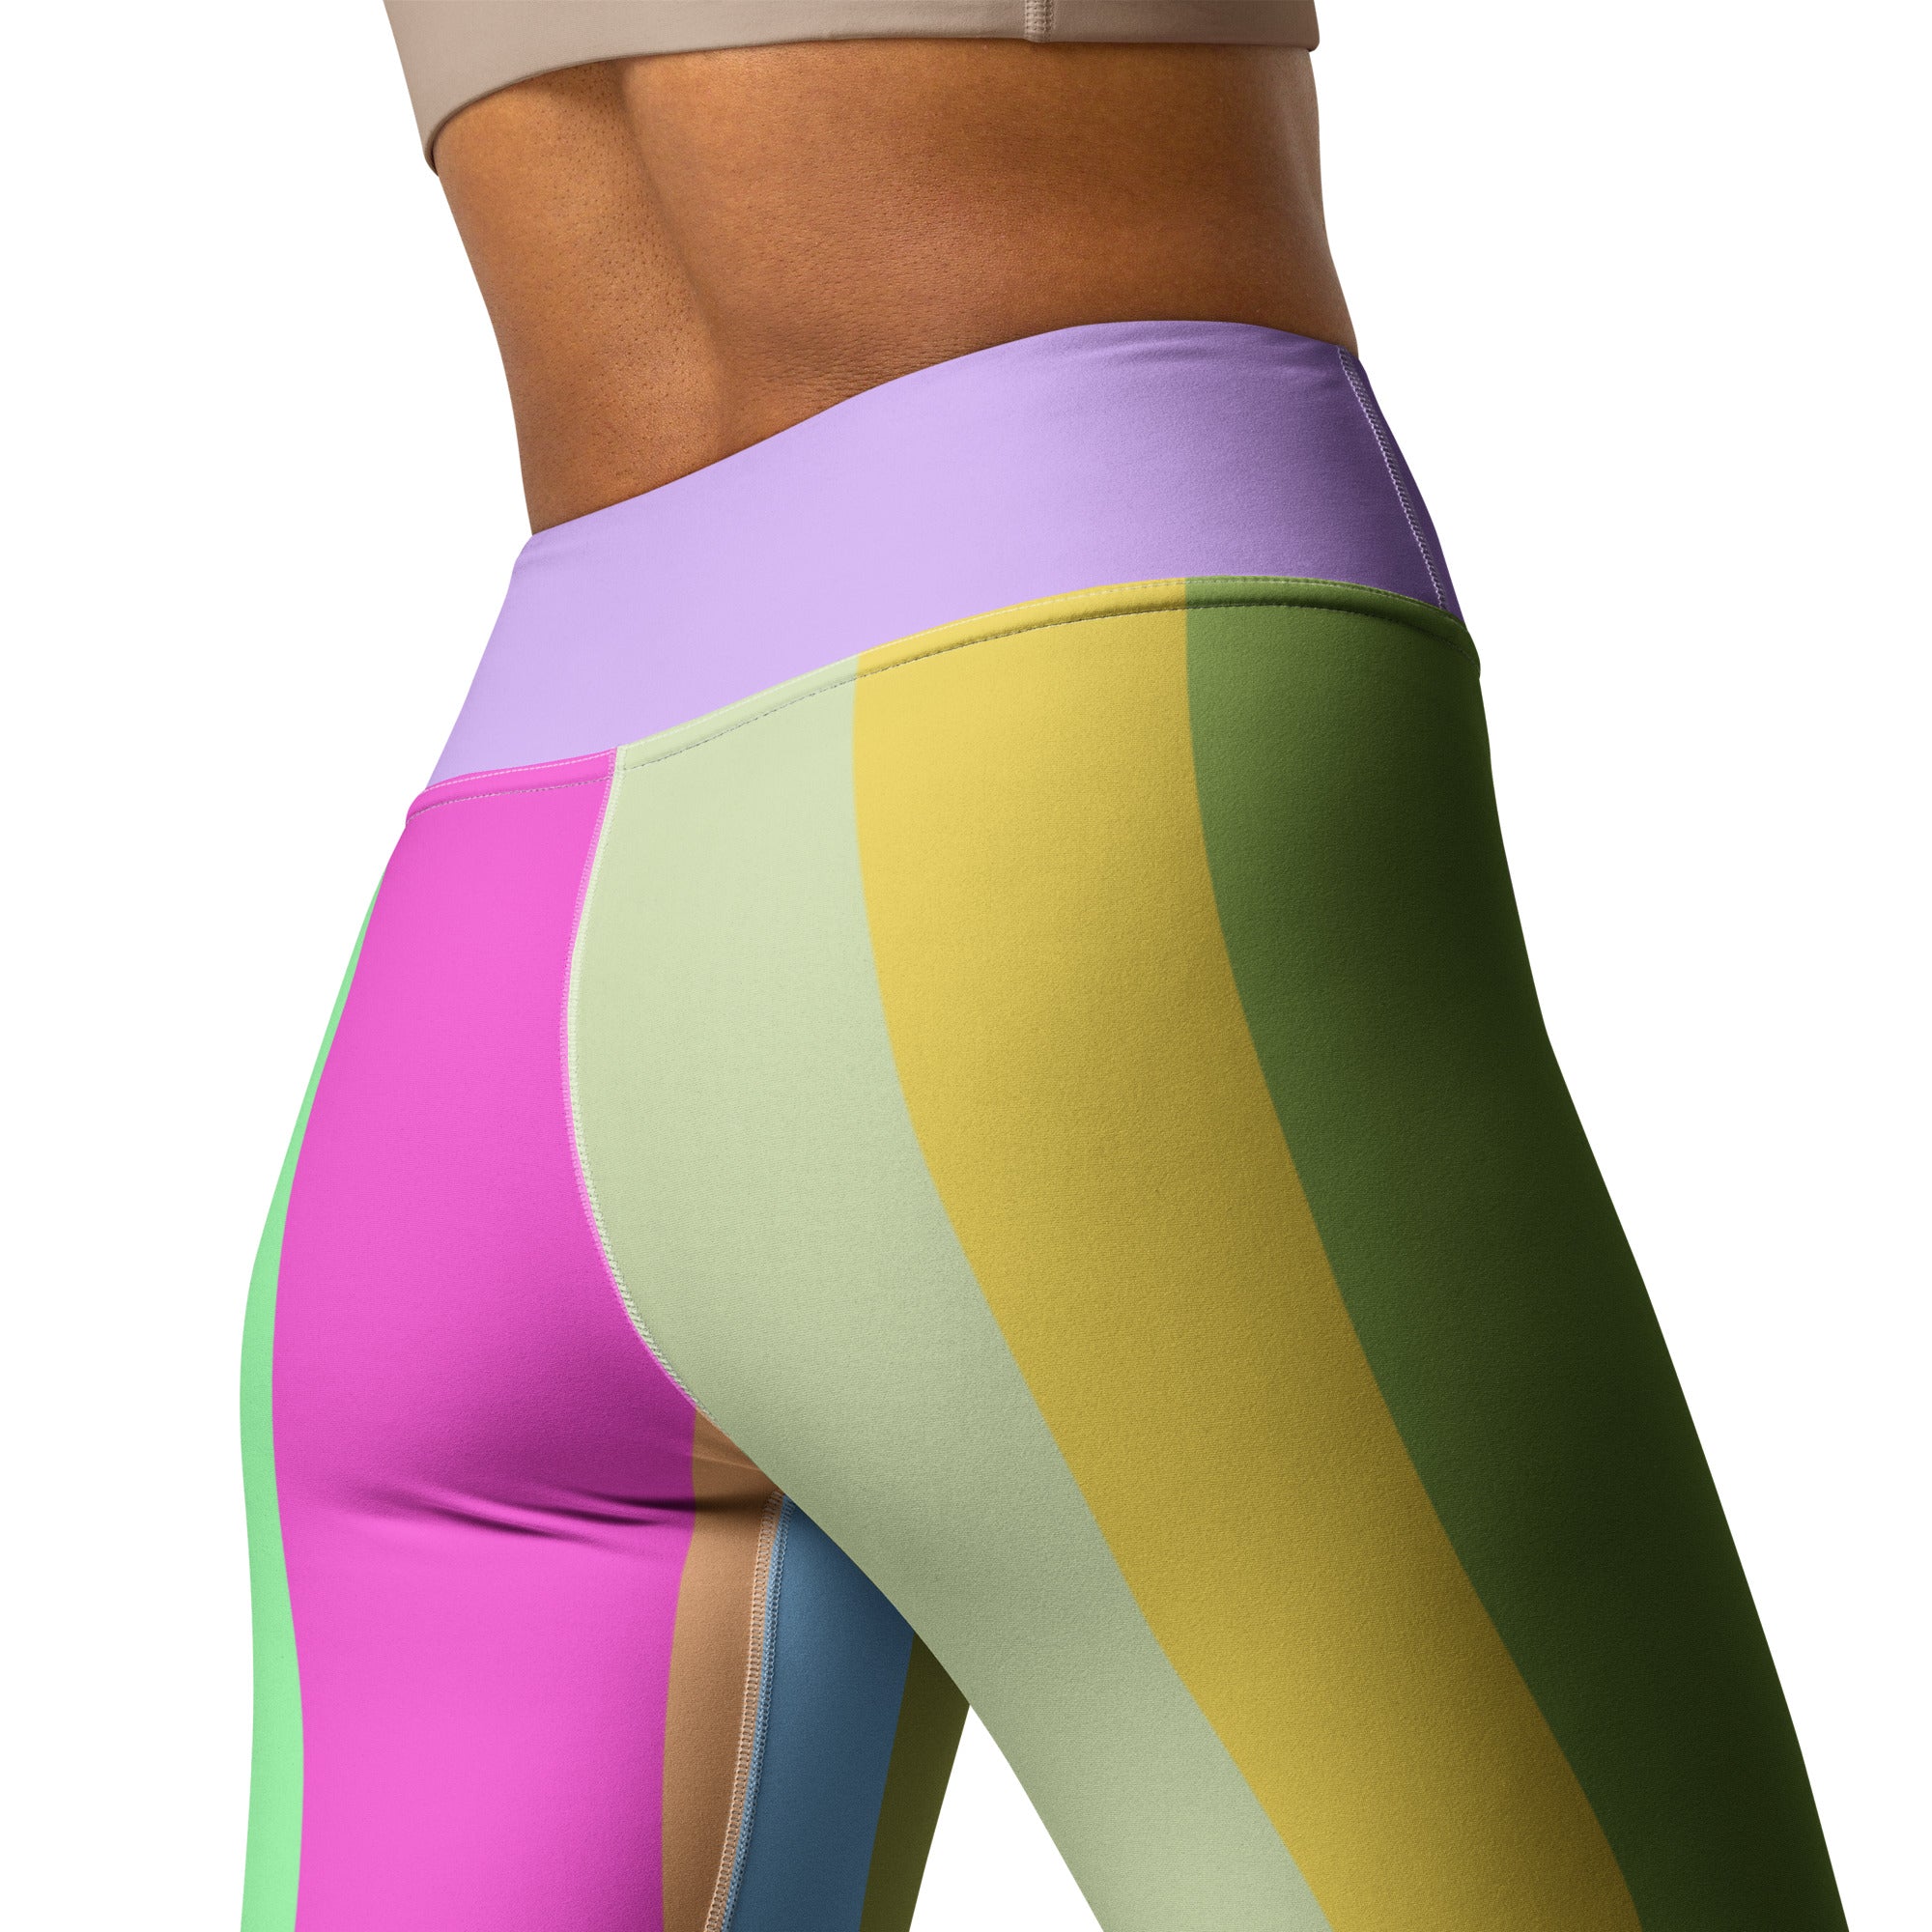 Stylish and flexible Galactic Stratosphere Yoga Leggings for all body types.